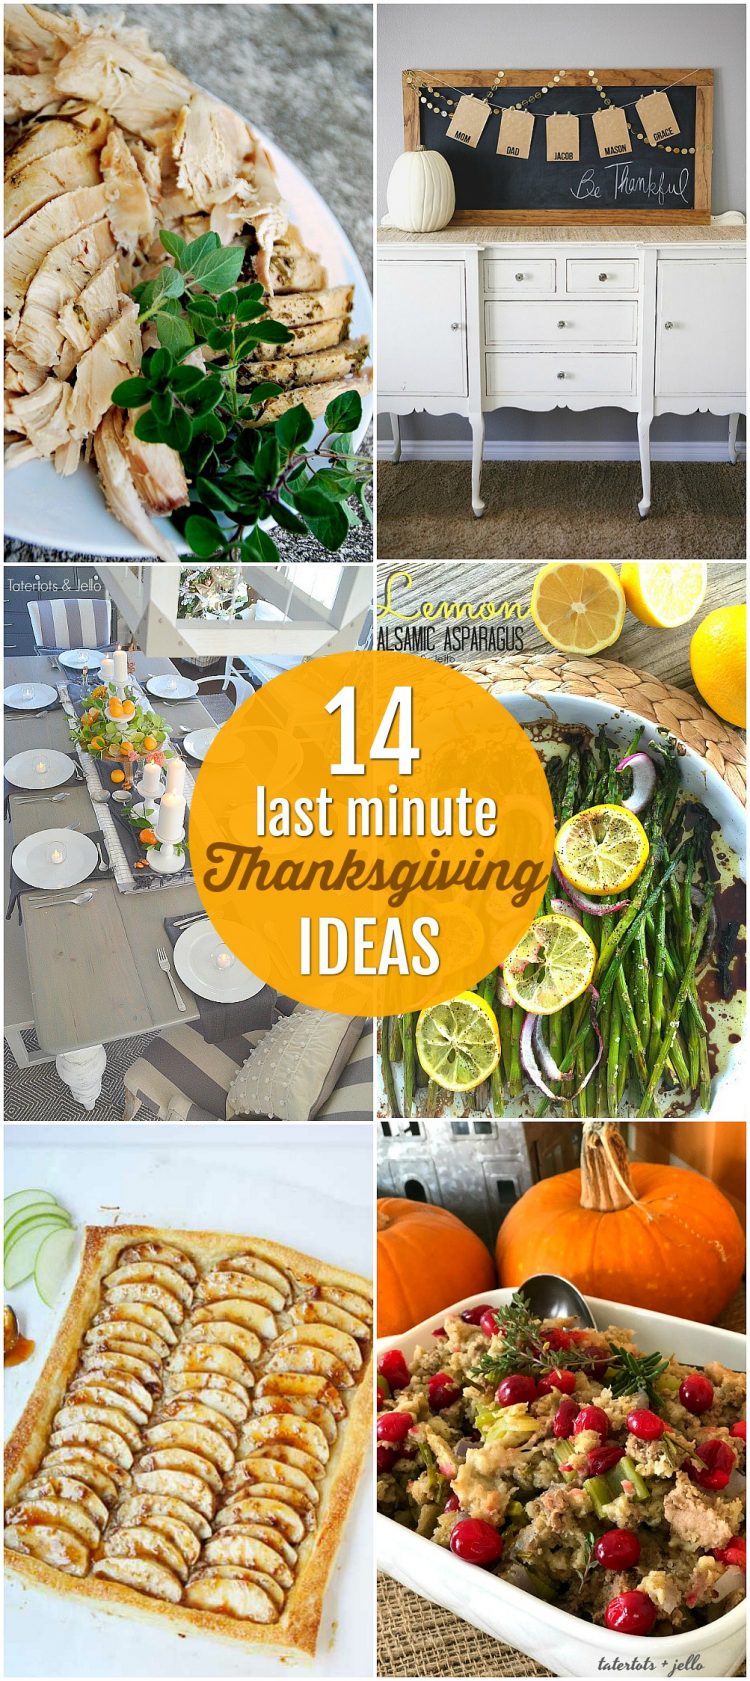 Last-minute Thanksgiving ideas. No need to stress, Thanksgiving is easy with these 14 fast and simple ideas! 